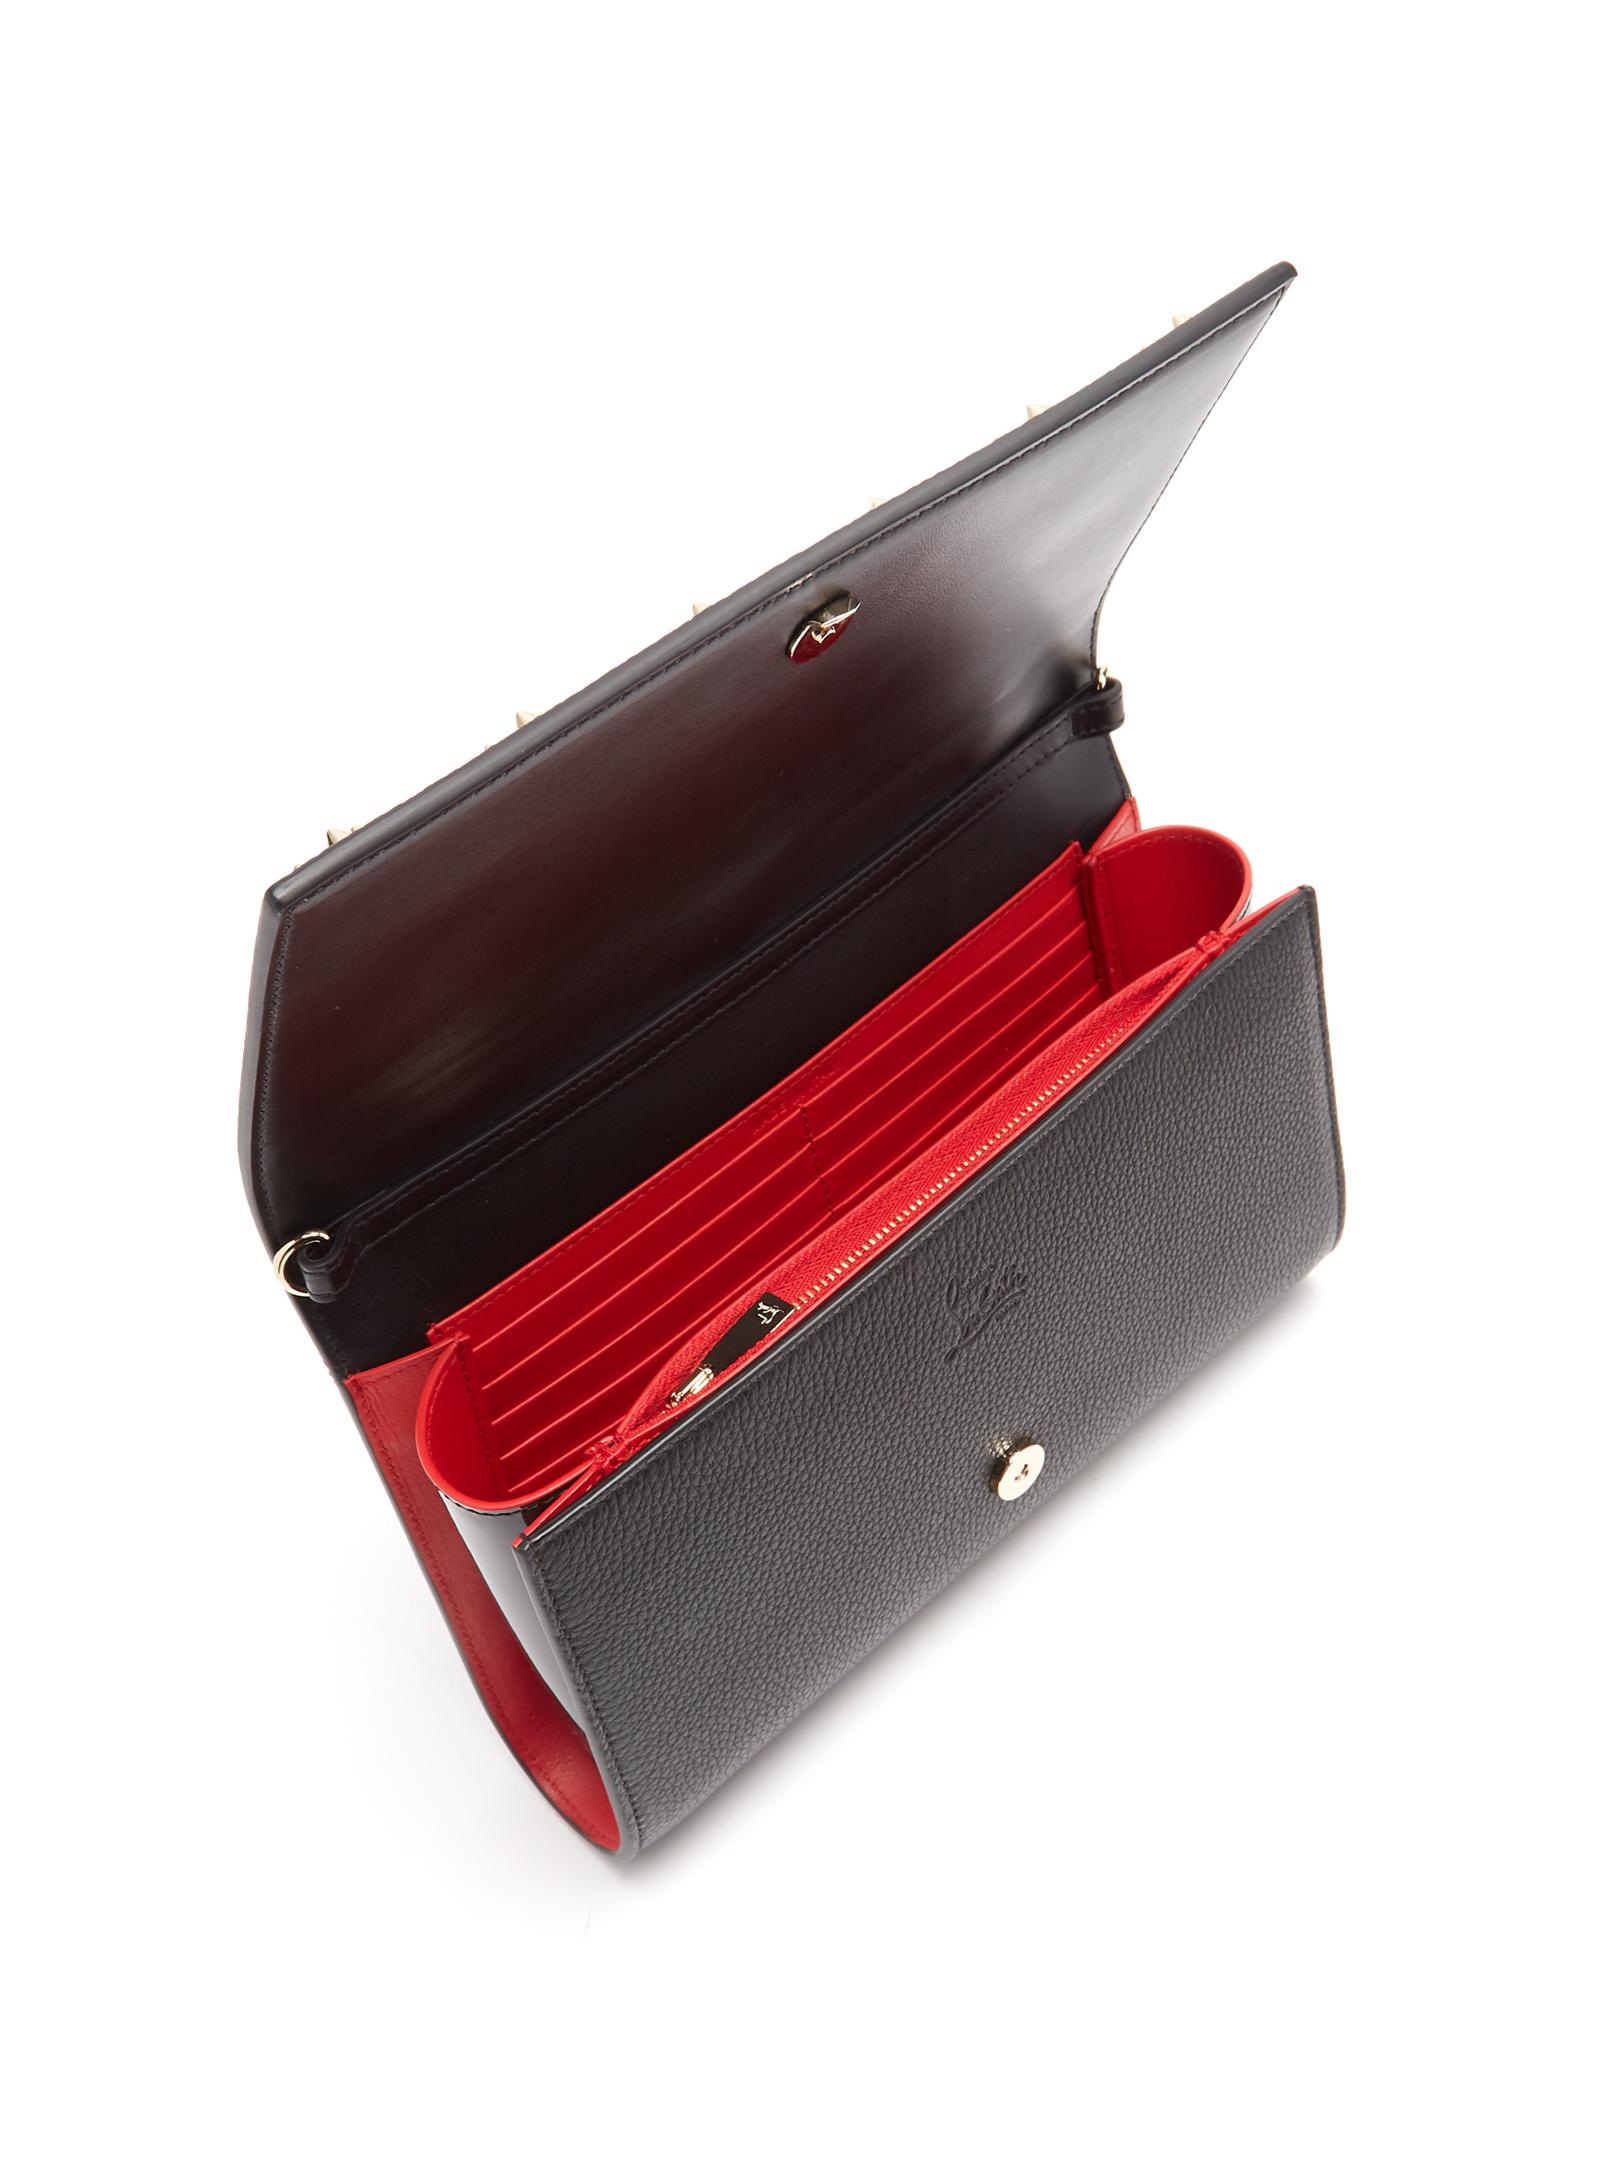 Christian Louboutin Paloma Embellished Leather Clutch in Black - Lyst